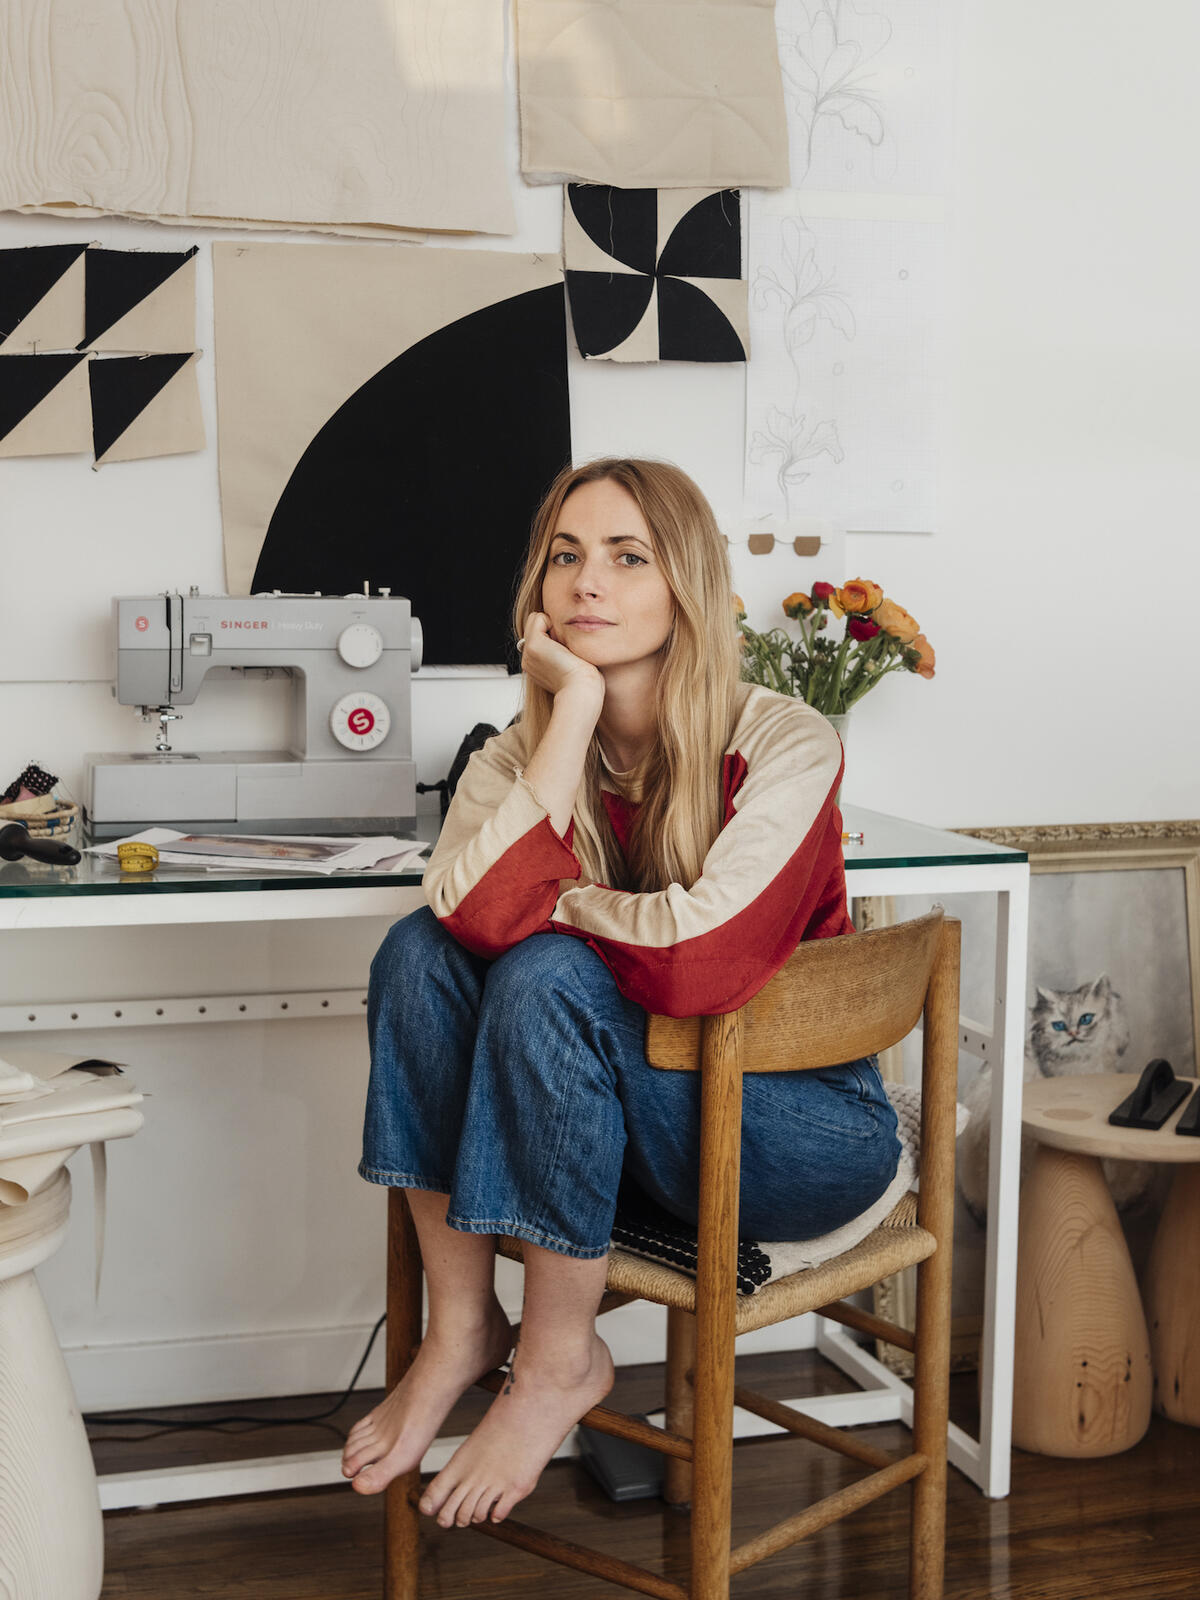 How burnout led this maker to start her own furniture studio